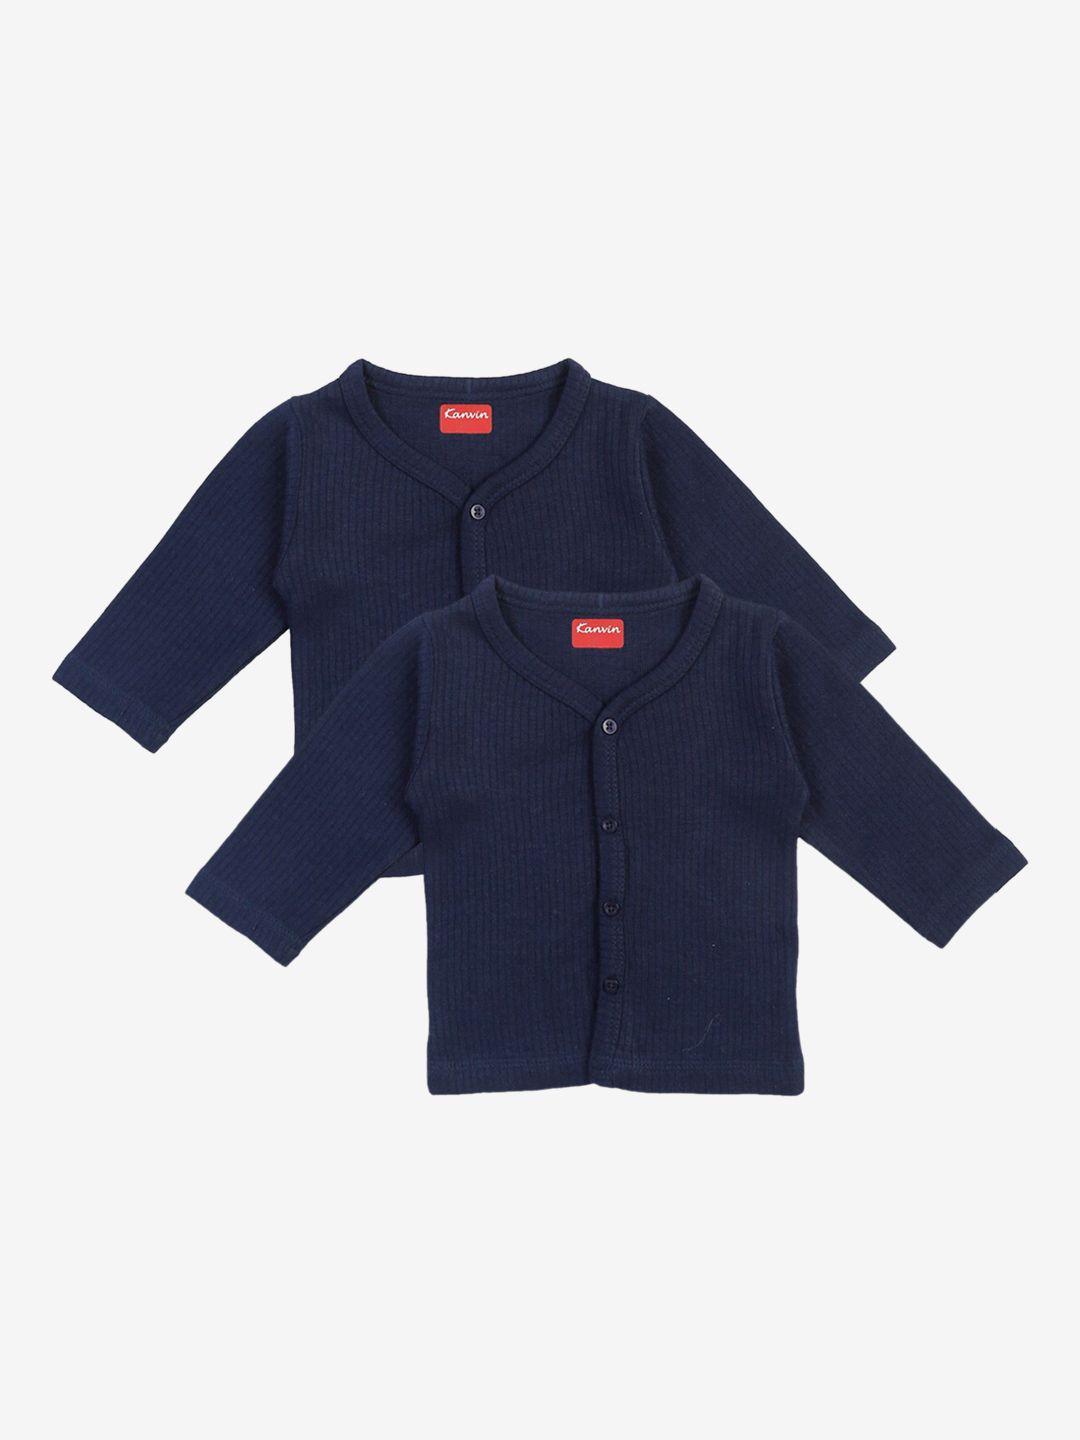 kanvin boys pack of 2 navy blue ribbed thermal tops